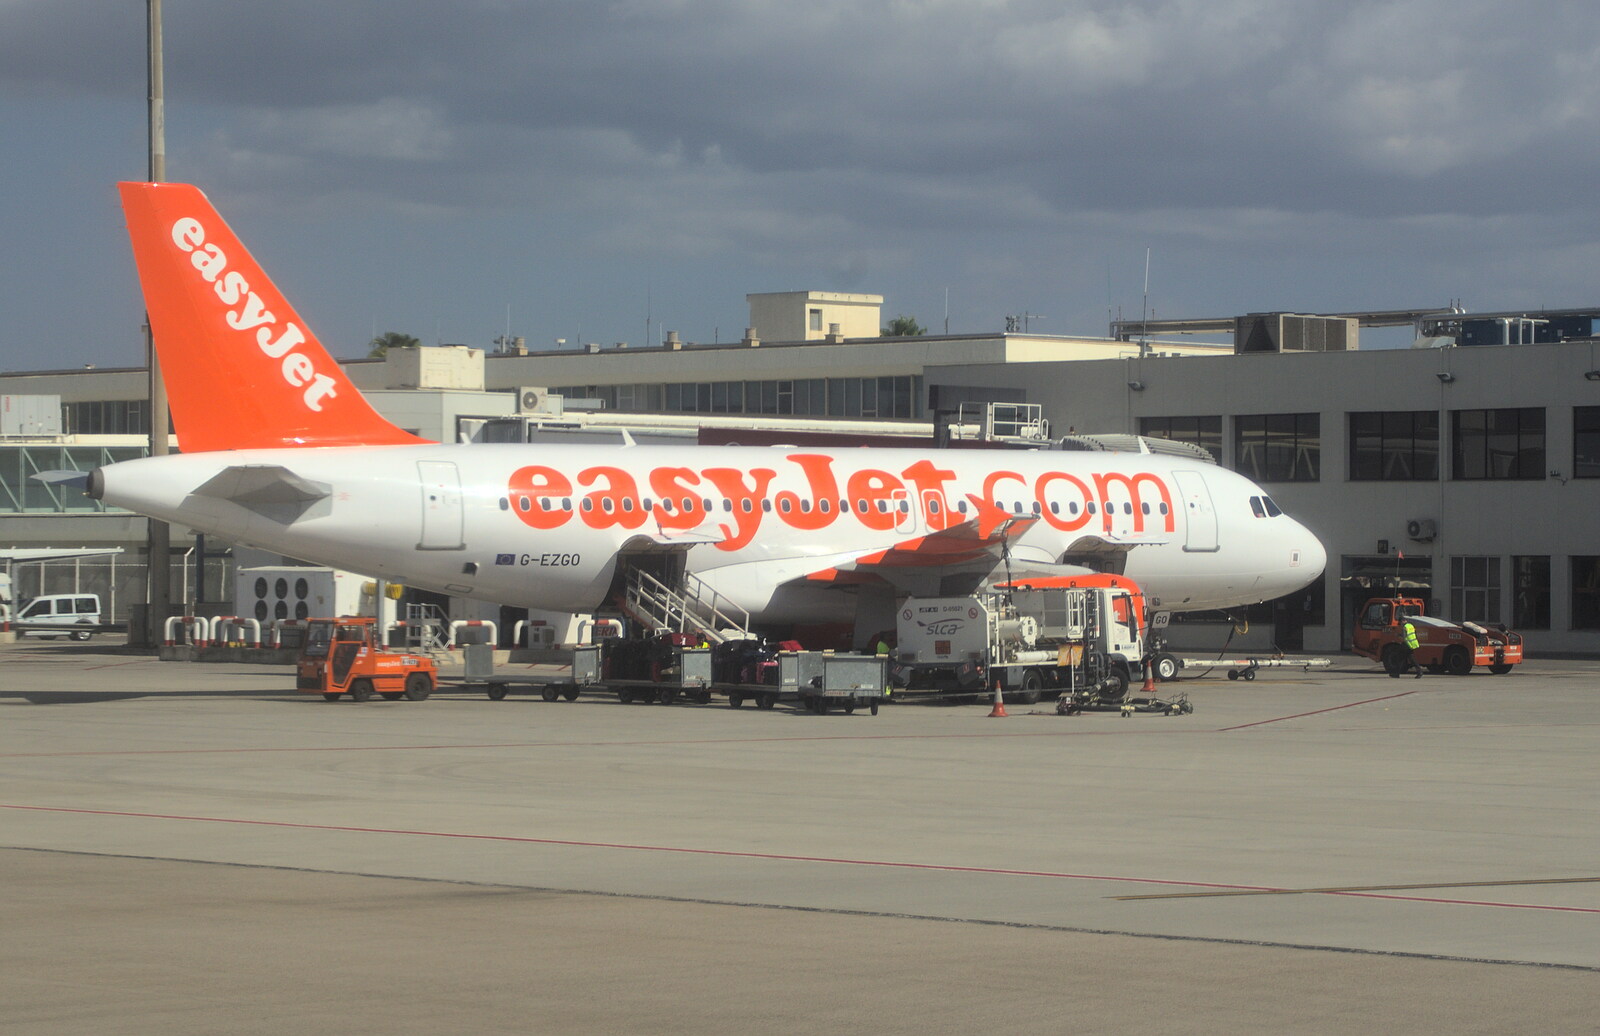 An EasyJet 737 on the stand from A Few Hours in Valdemossa, Mallorca, Spain - 13th September 2012